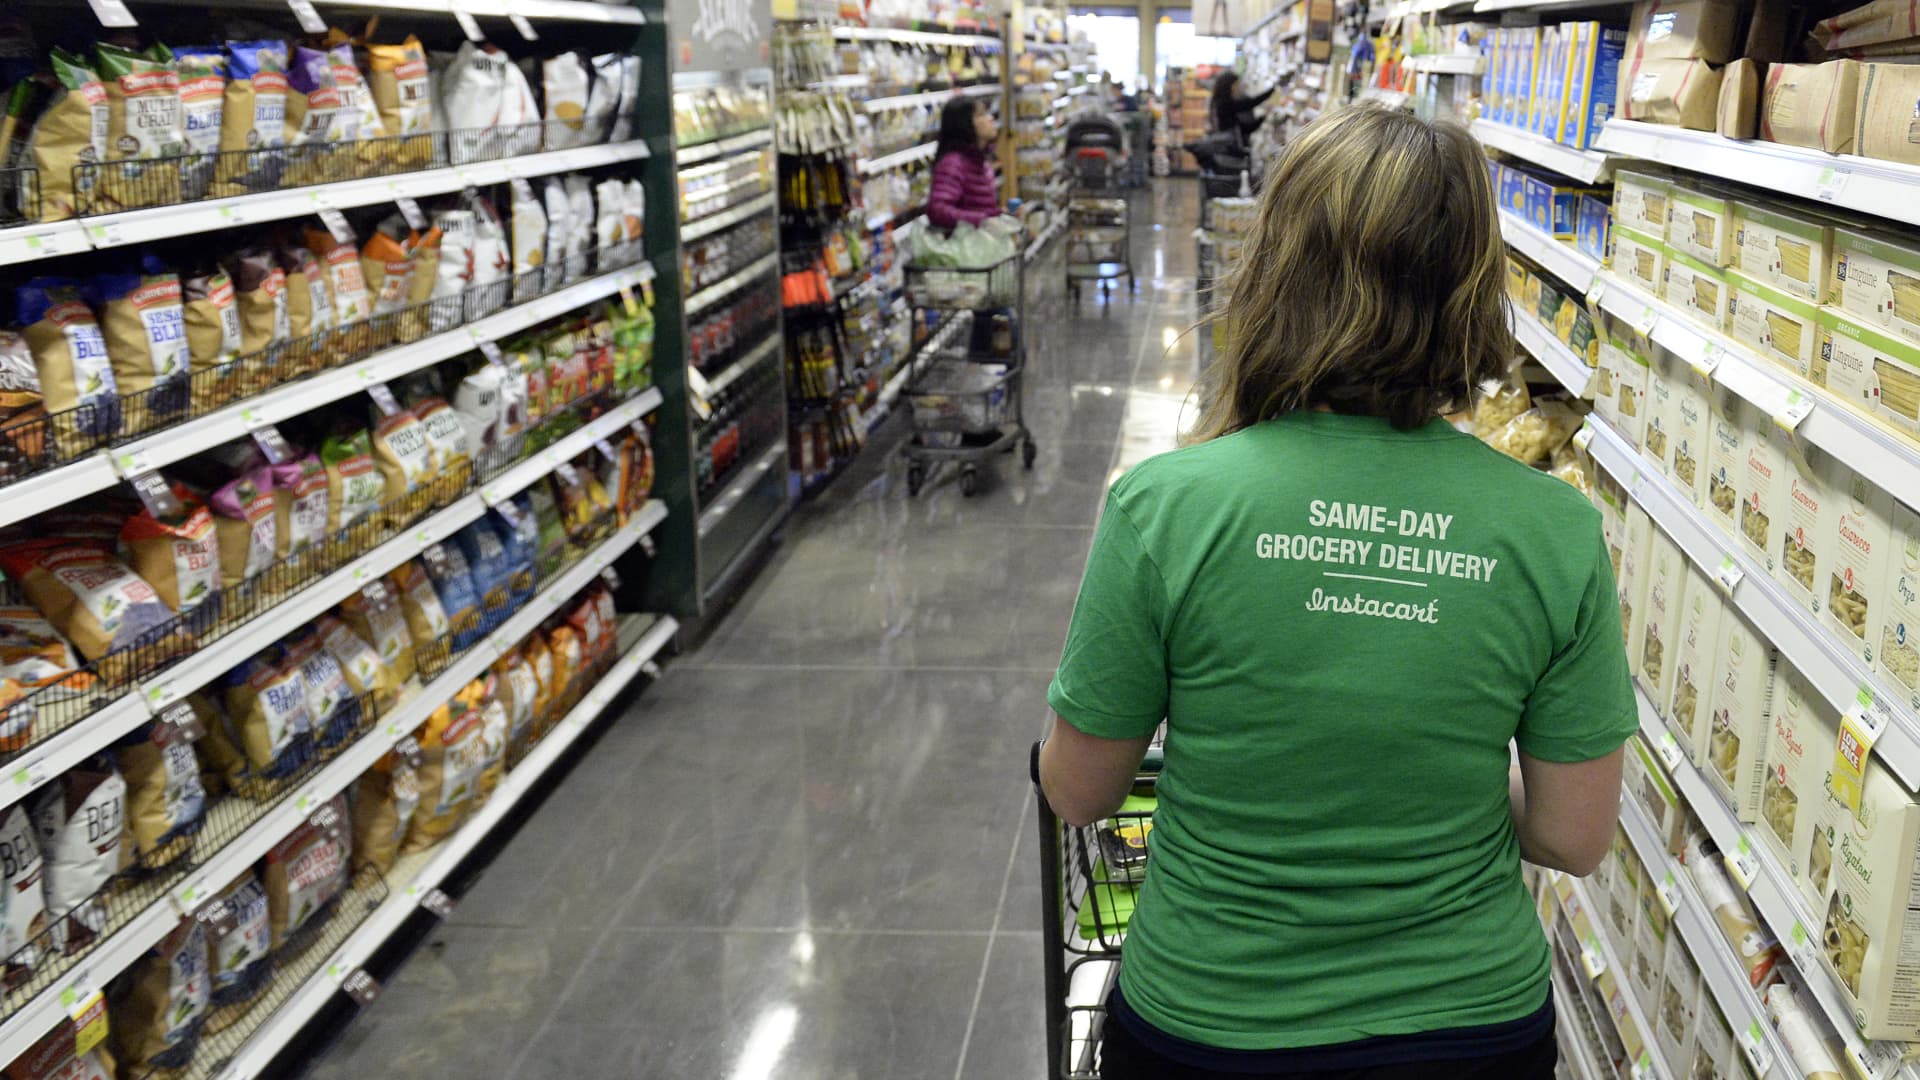 Instacart to provide workers with safety kits following strike over coronavirus protections